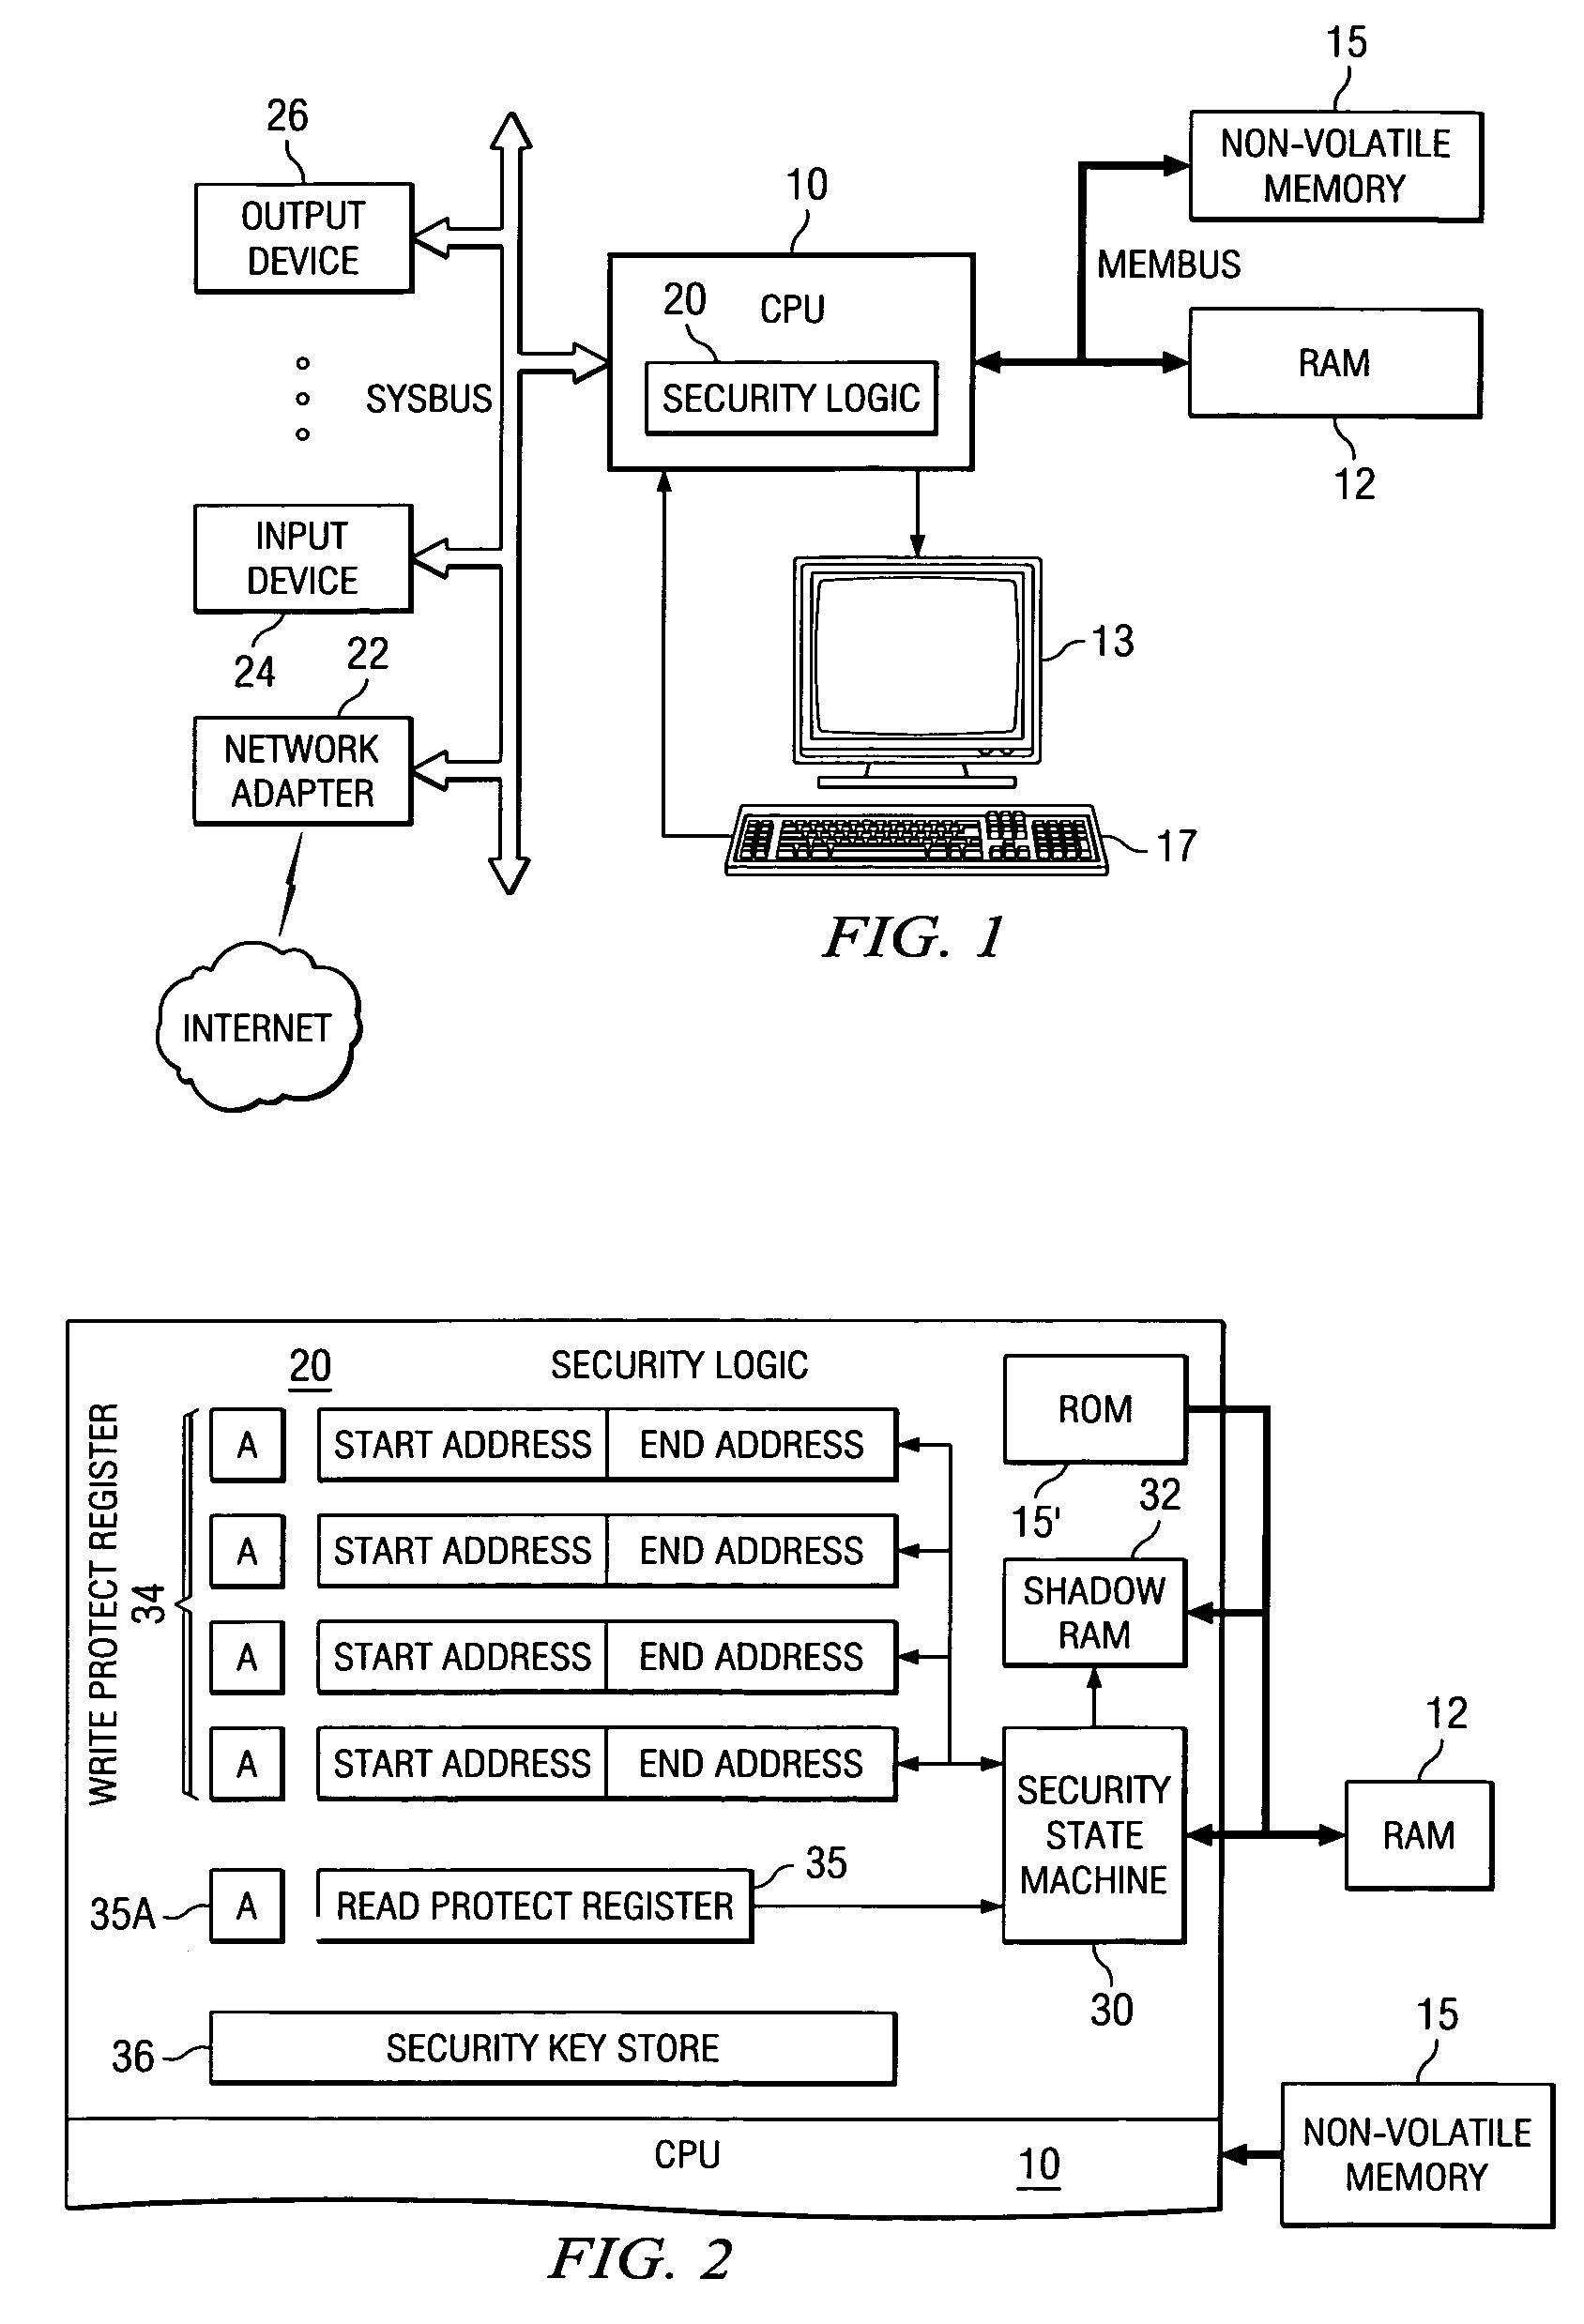 Implementation of a secure computing environment by using a secure bootloader, shadow memory, and protected memory